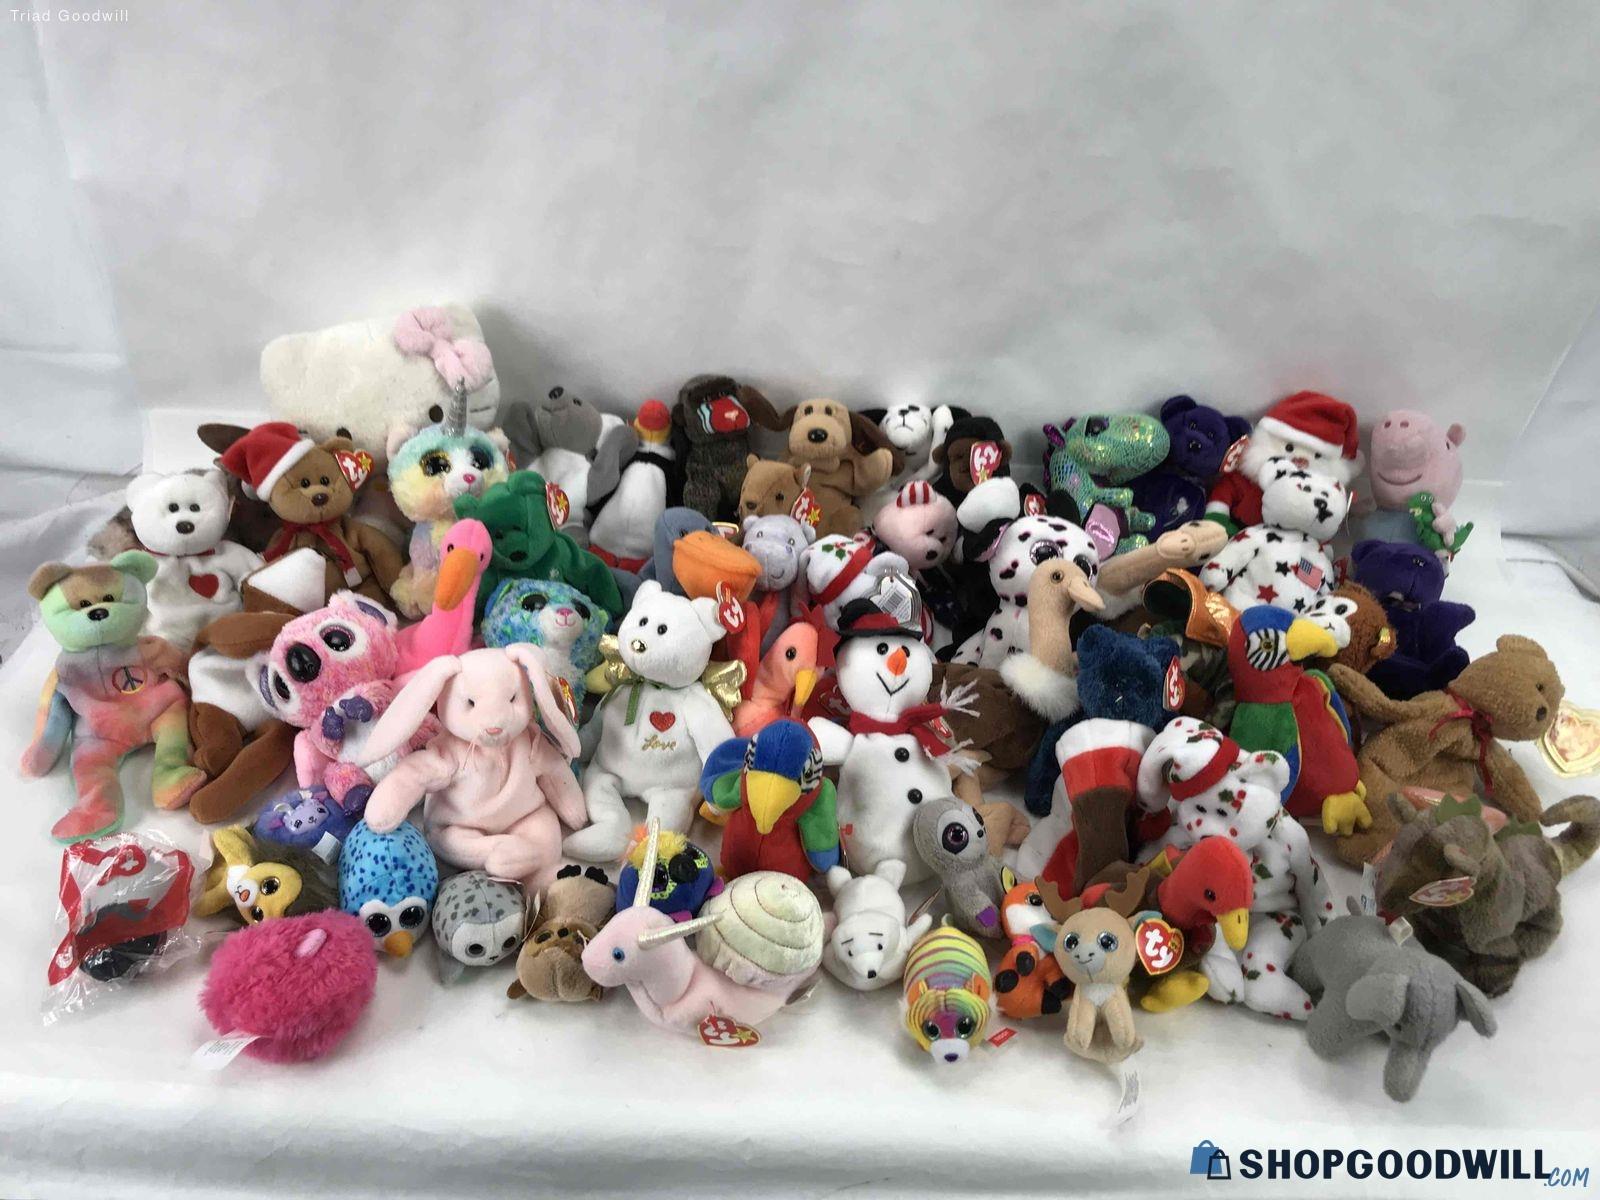 Assorted 13lb Lot of Ty Plush Toys - shopgoodwill.com